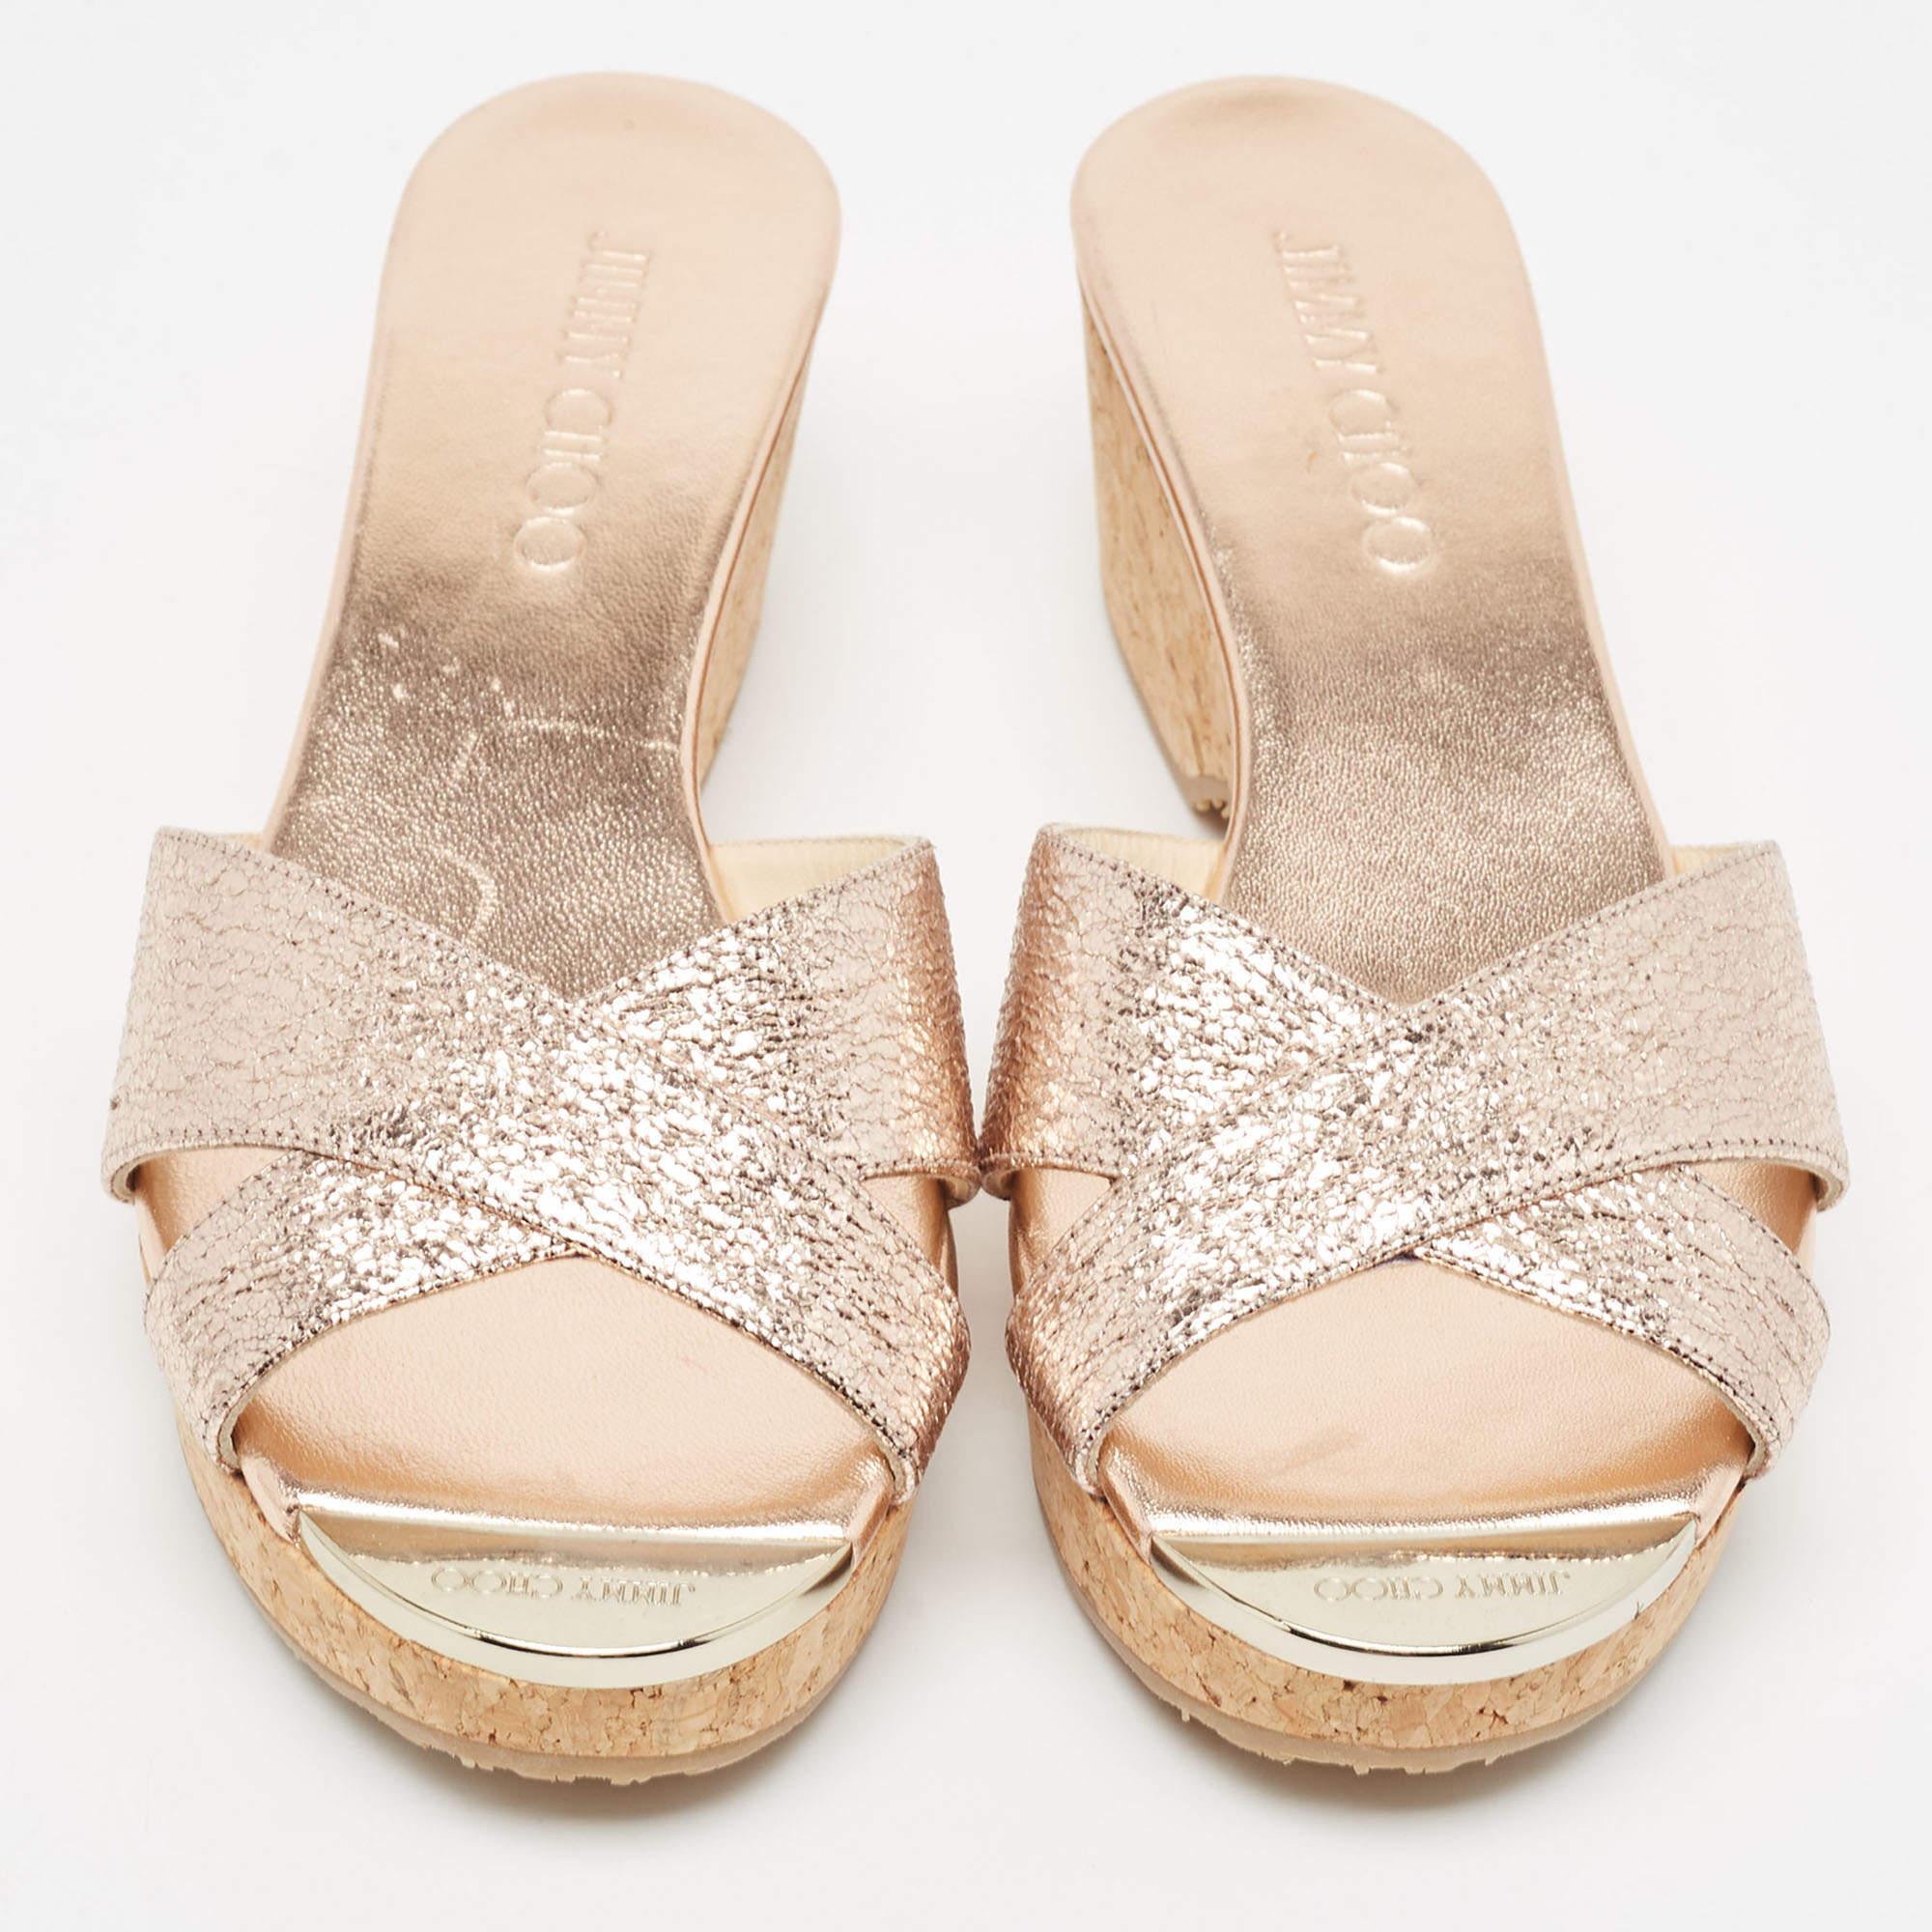 These timeless Jimmy Choo slides are meant to last you season after season. They have a comfortable fit and high-quality finish.

